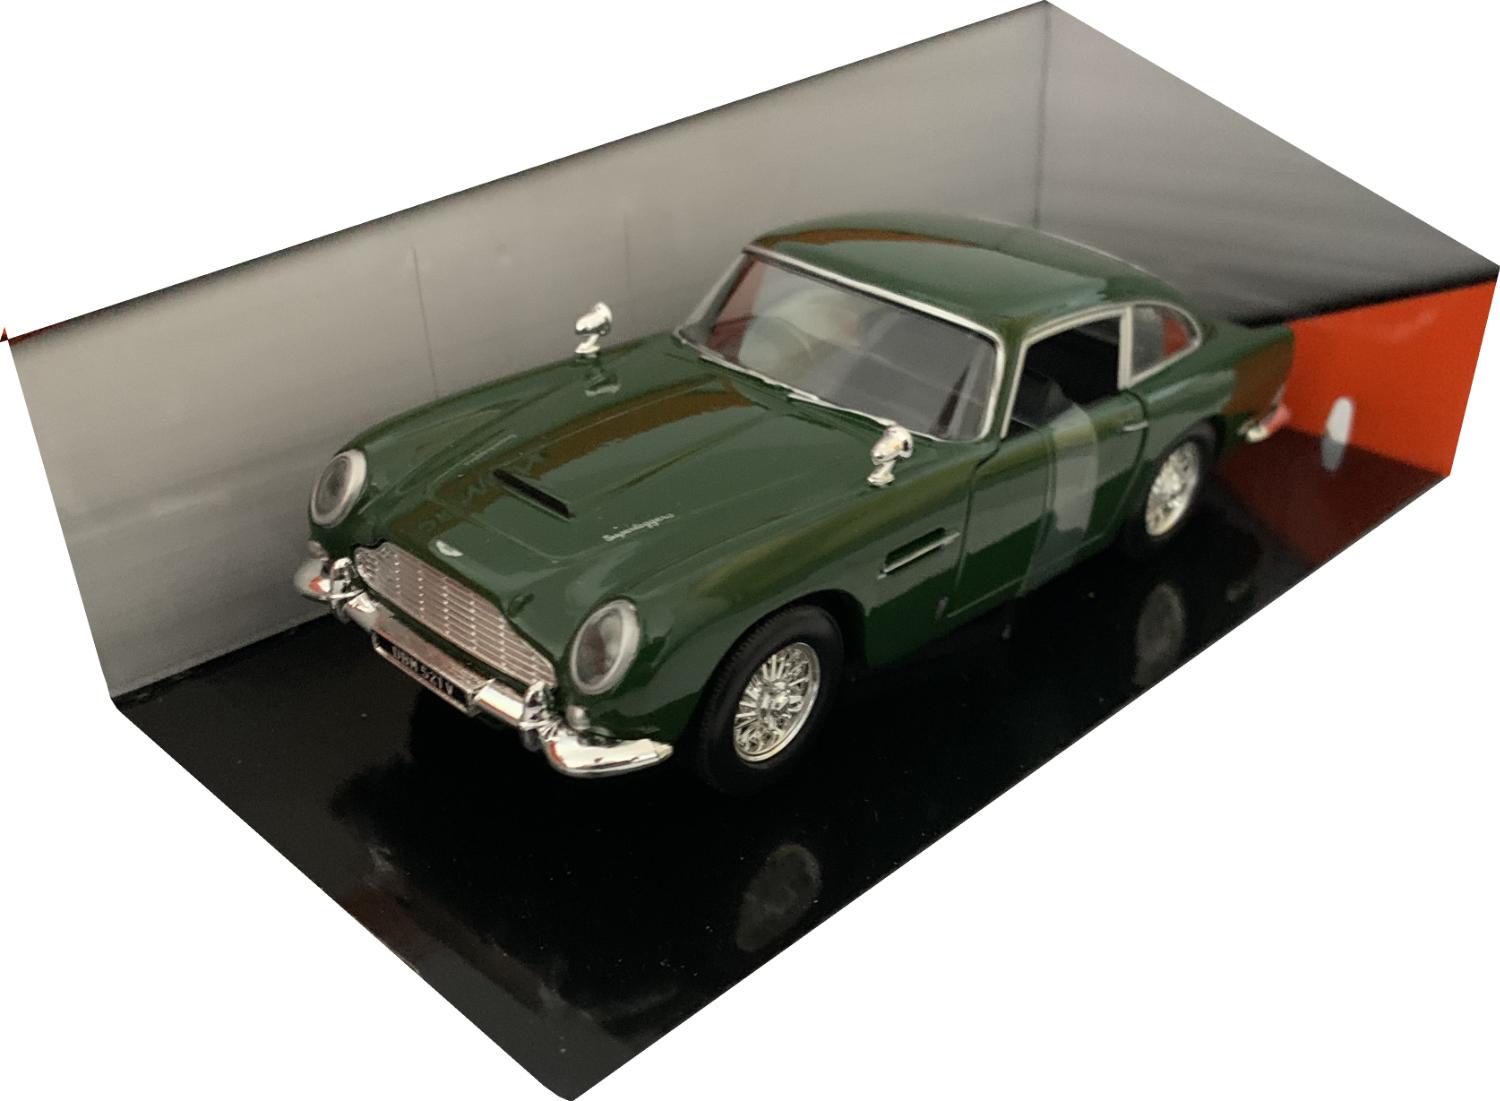 Aston Martin DB5 in green 1:24 scale diecast classic car model from Motormax, timeless legends